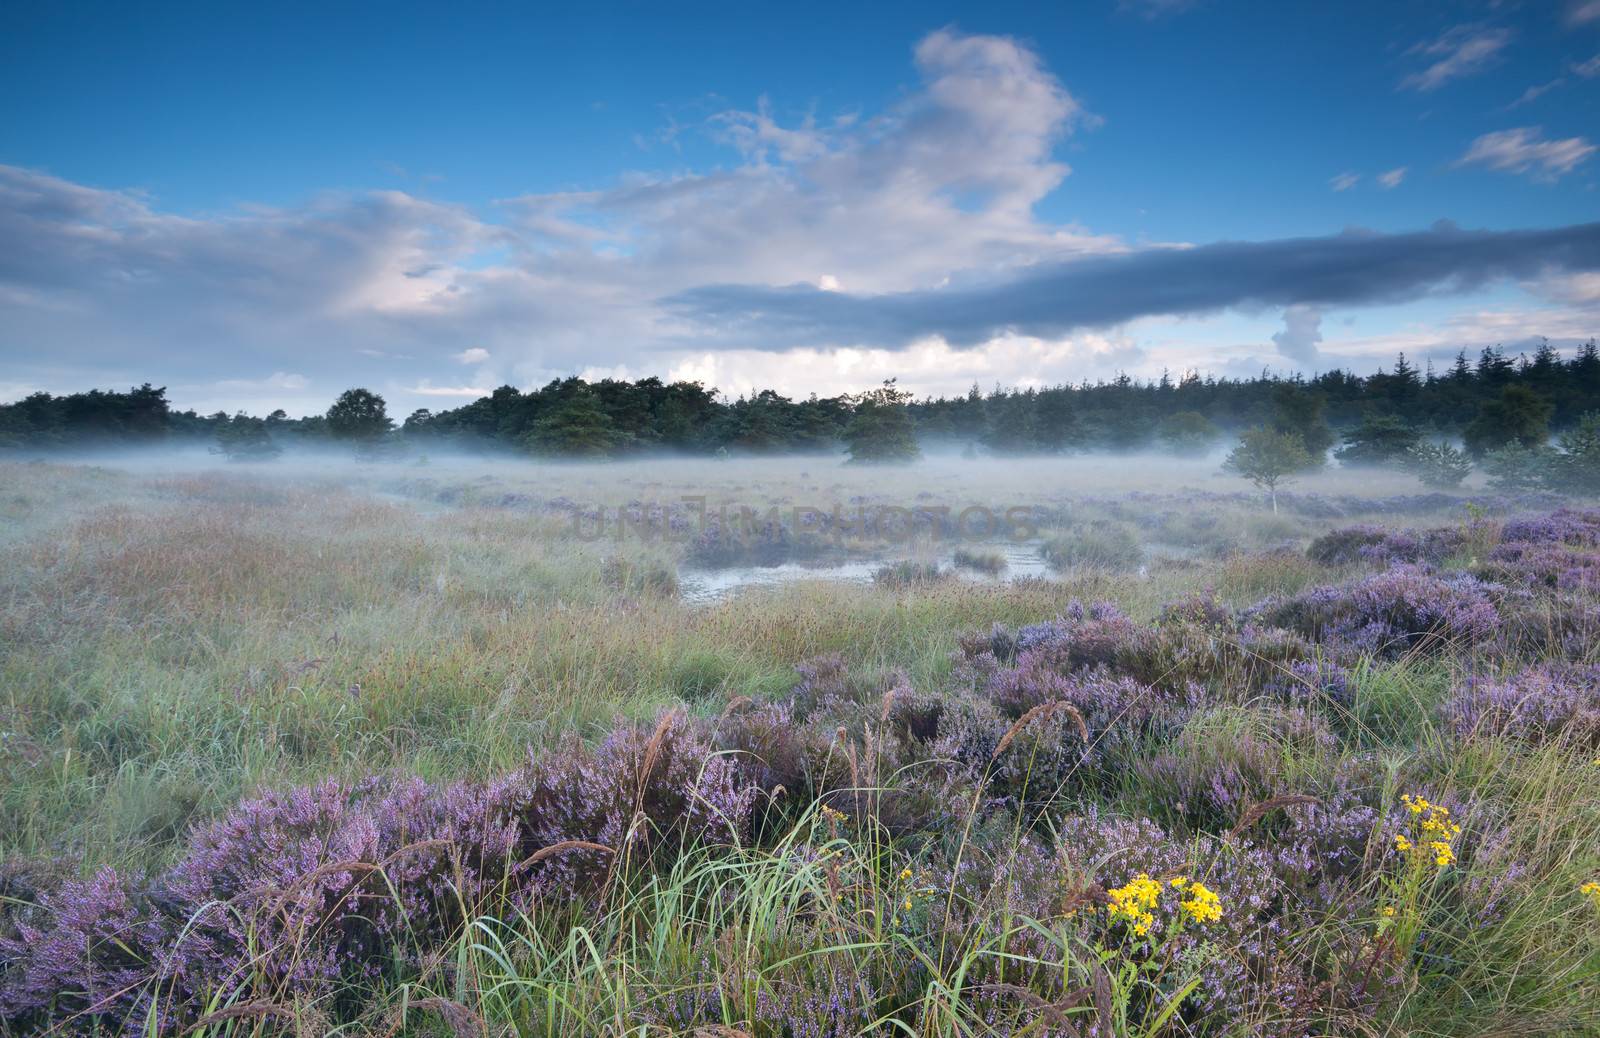 swamp and flowering heather in misty morning by catolla